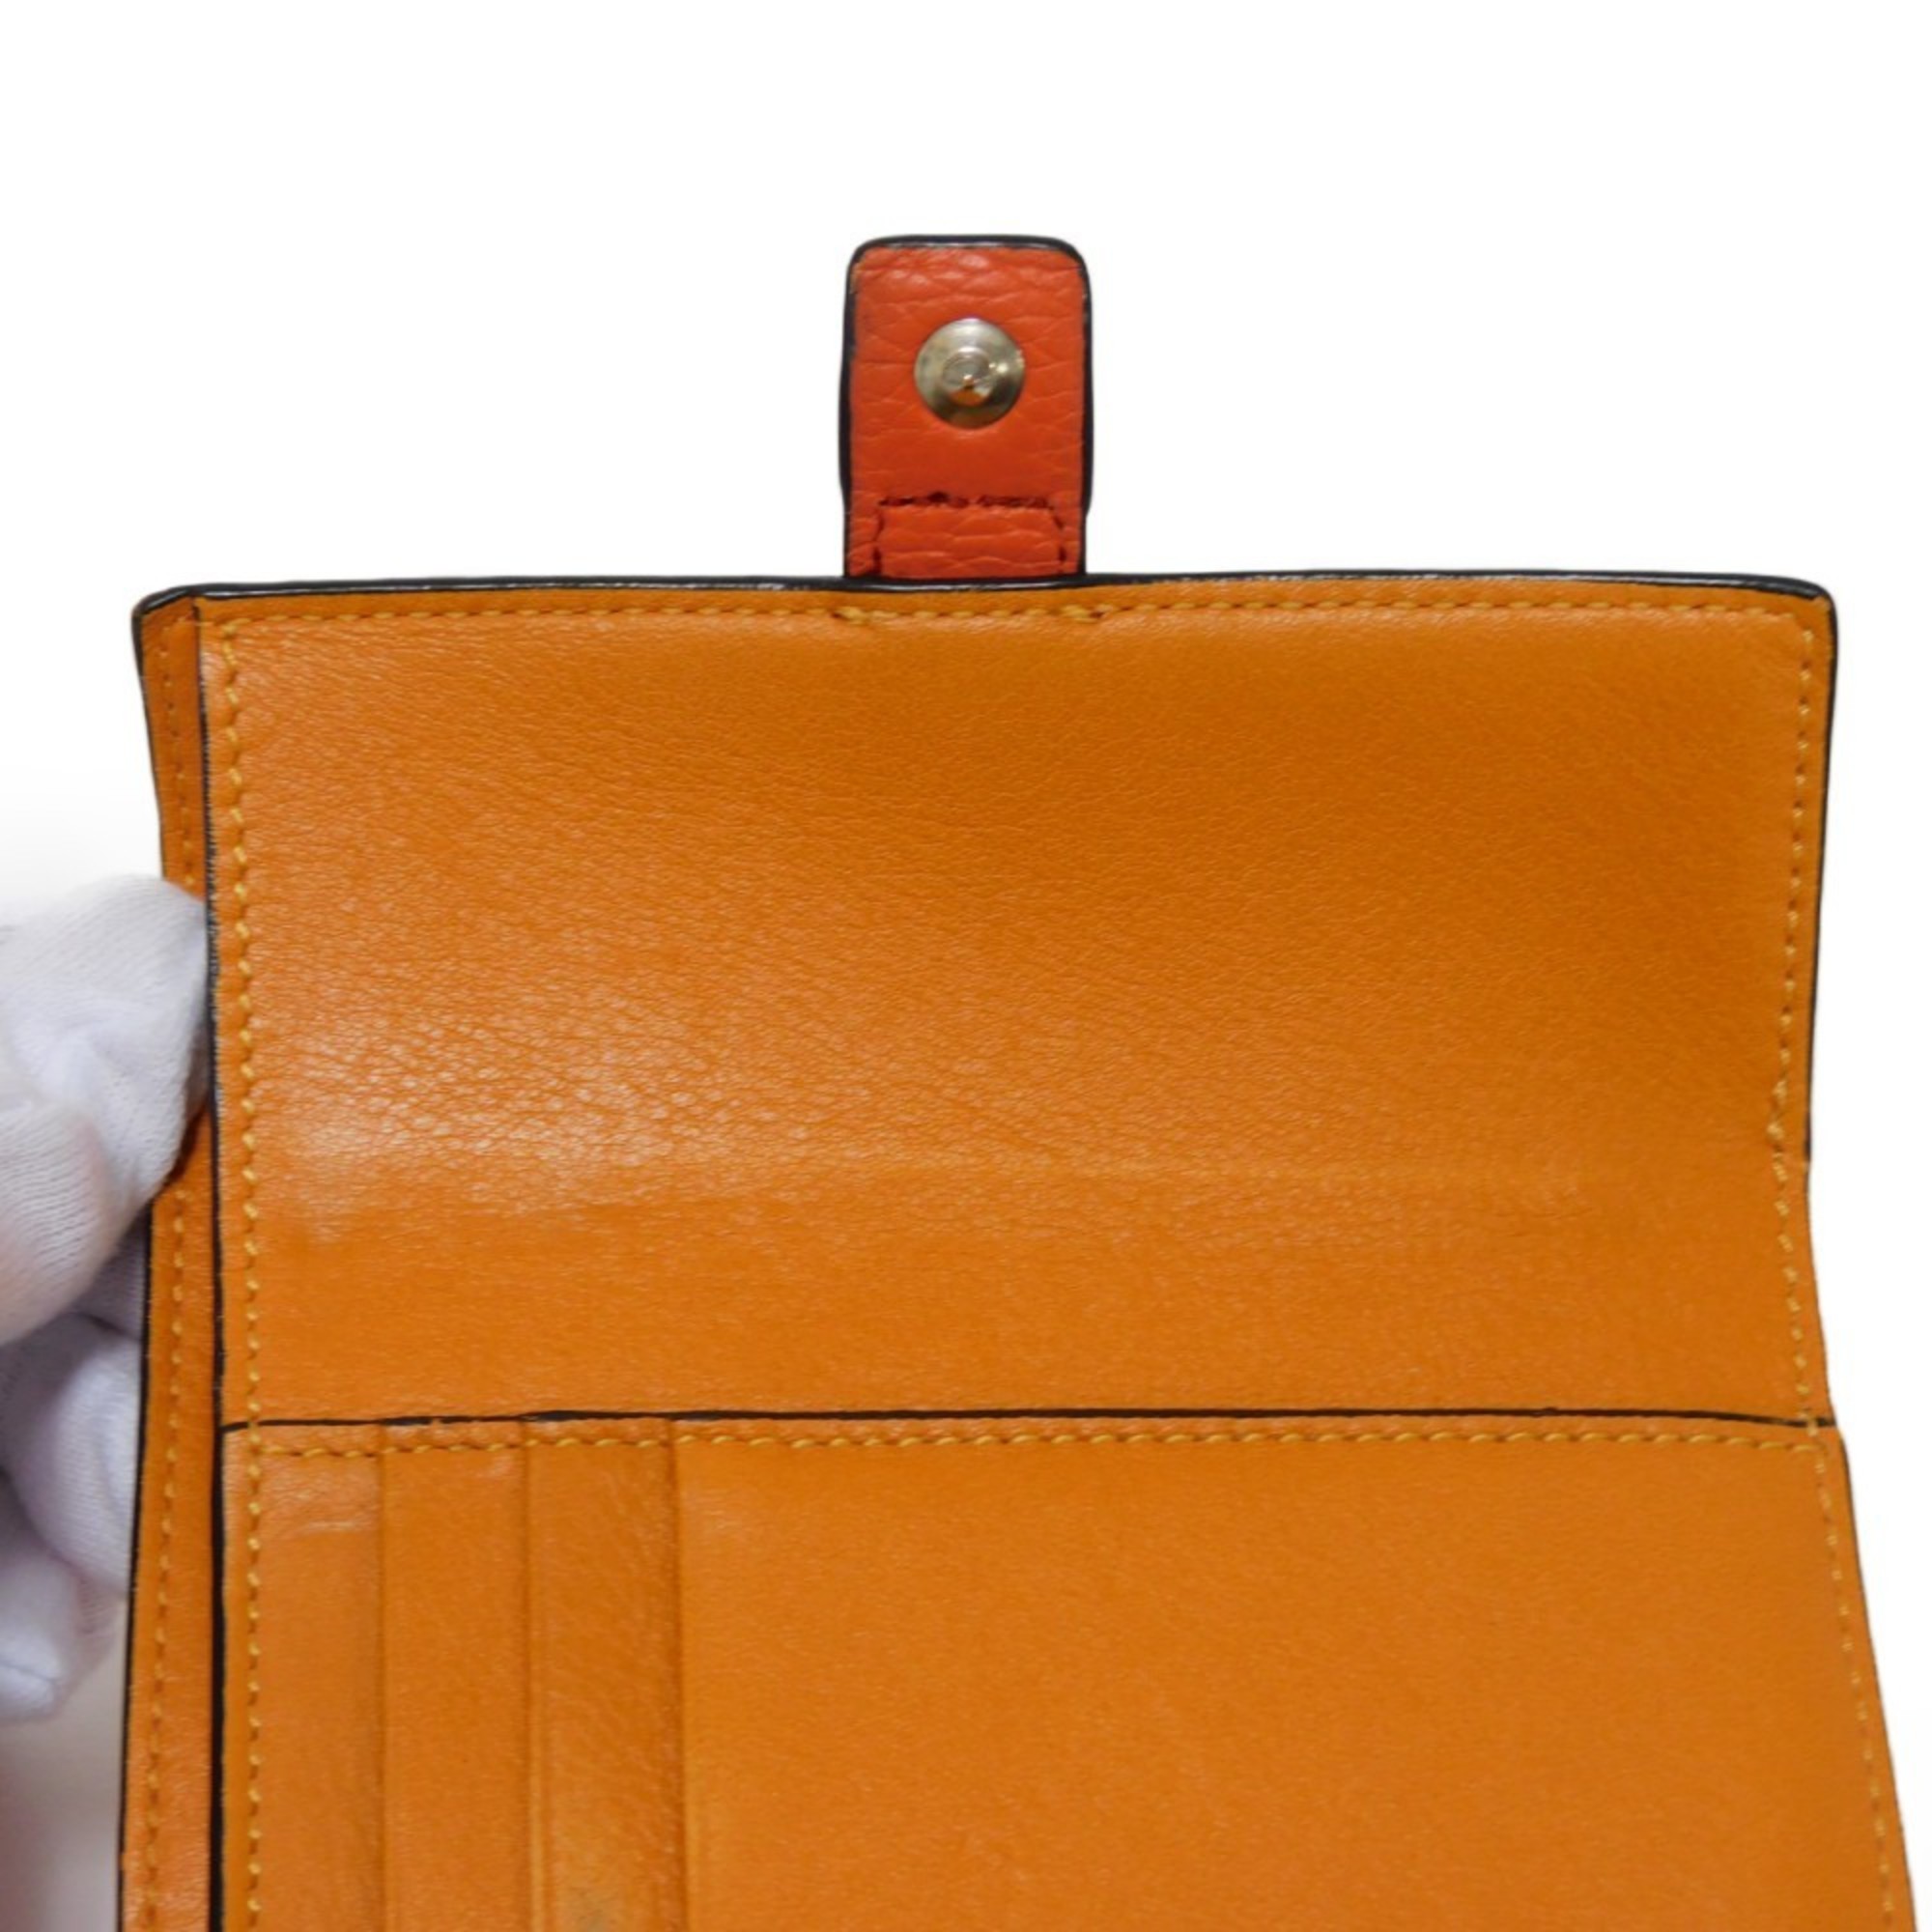 LOEWE Trifold Wallet Vertical Small Strap Coral Apricot Orange Anagram 124.12.S86 6977 Women's Billfold